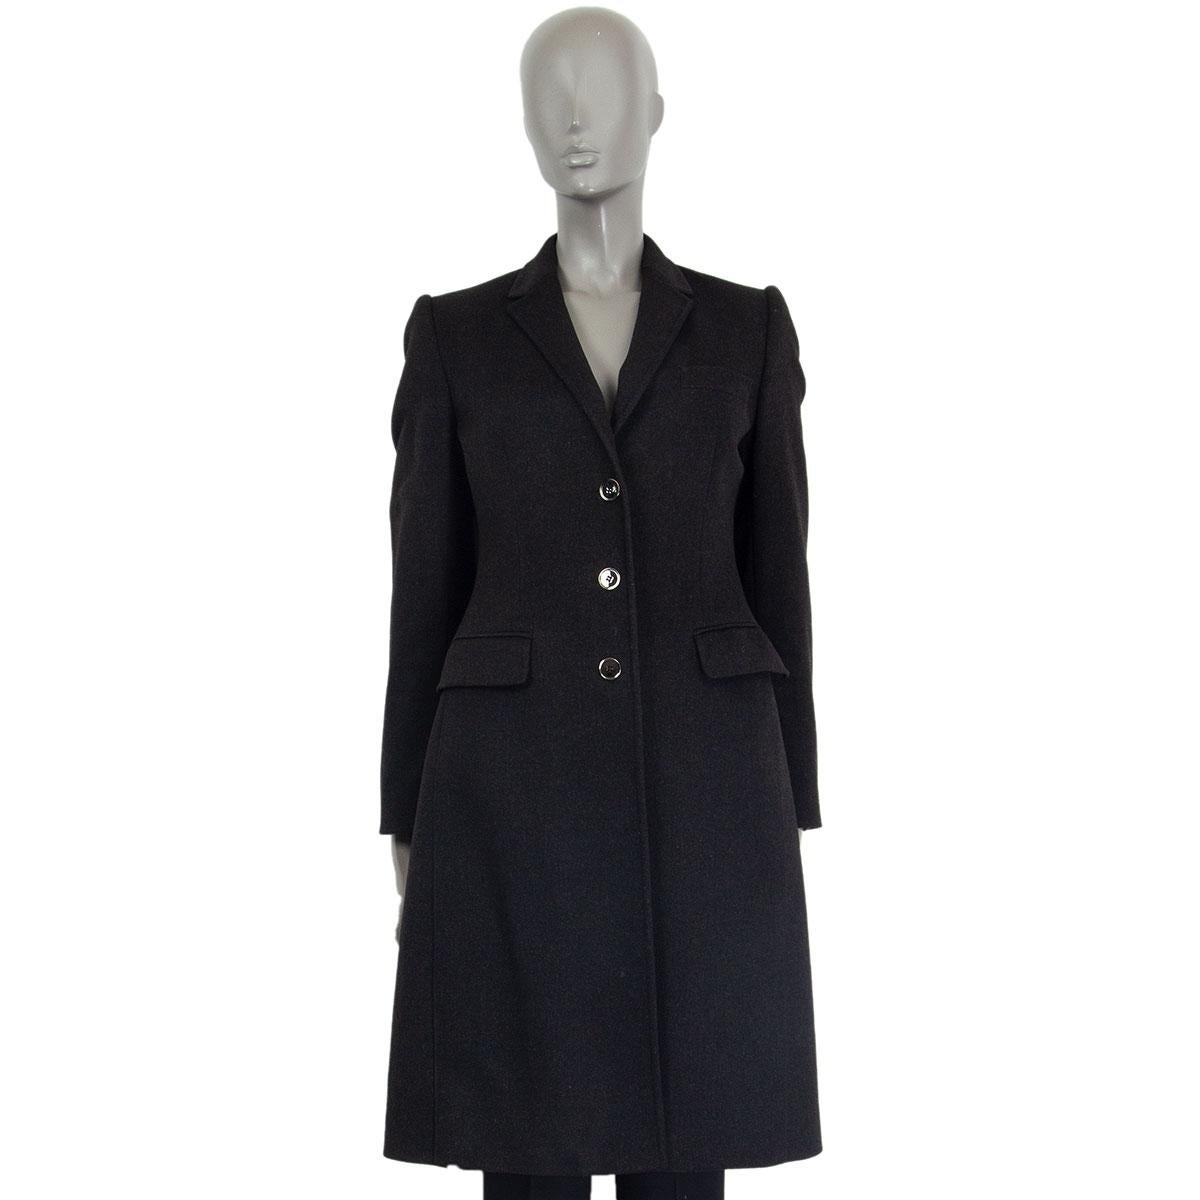 Dolce & Gabbana classic coat in black virgin wool (90%) and cashmere (10%) with narrow notch collar, one decorative chest pocket and two decorative flap pockets. Closes on the front with buttons. Lined in acetate (78%), nylon (16%) and elastane